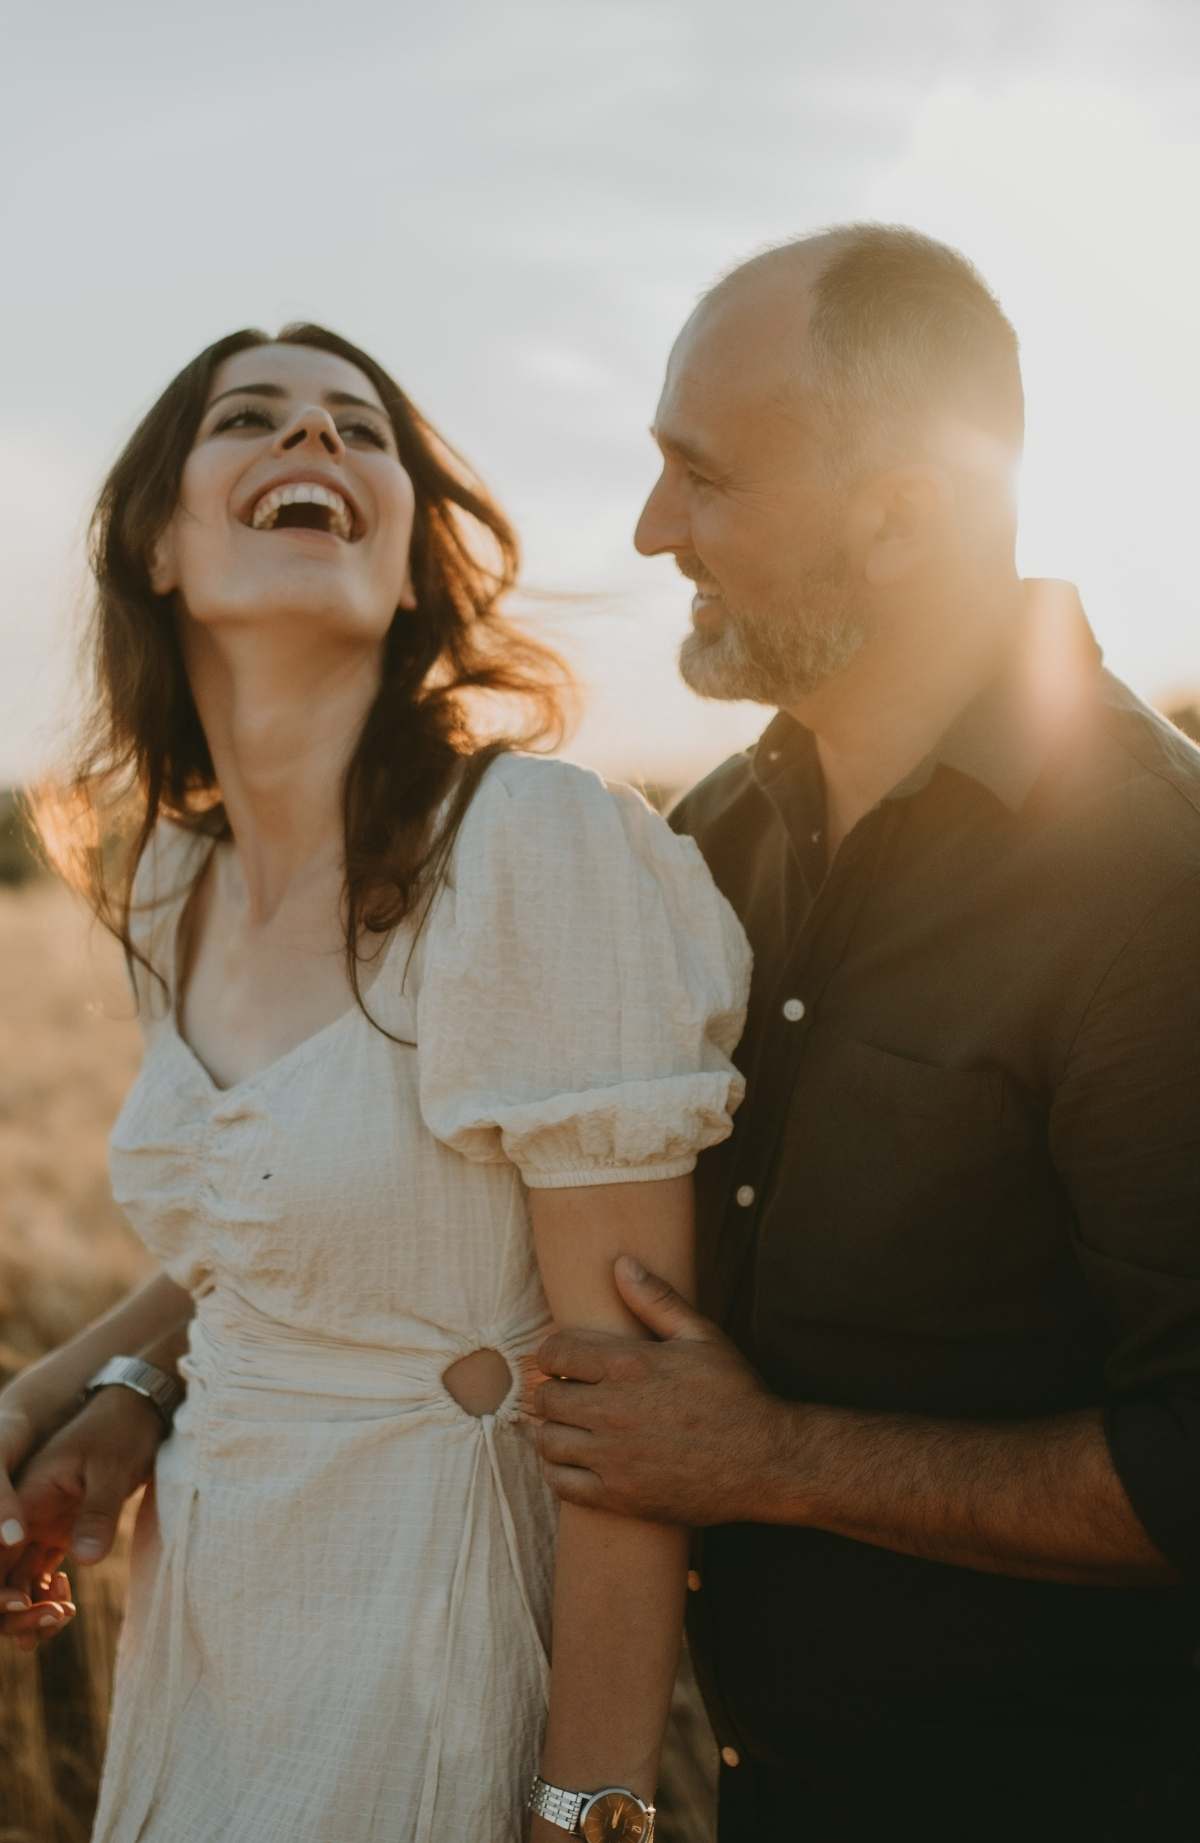 All marriages go through ups and downs, but there is something you can do to not only help your marriage survive, but also thrive. It’s called emotional intimacy. Here is what emotional intimacy is and why your marriage needs it.